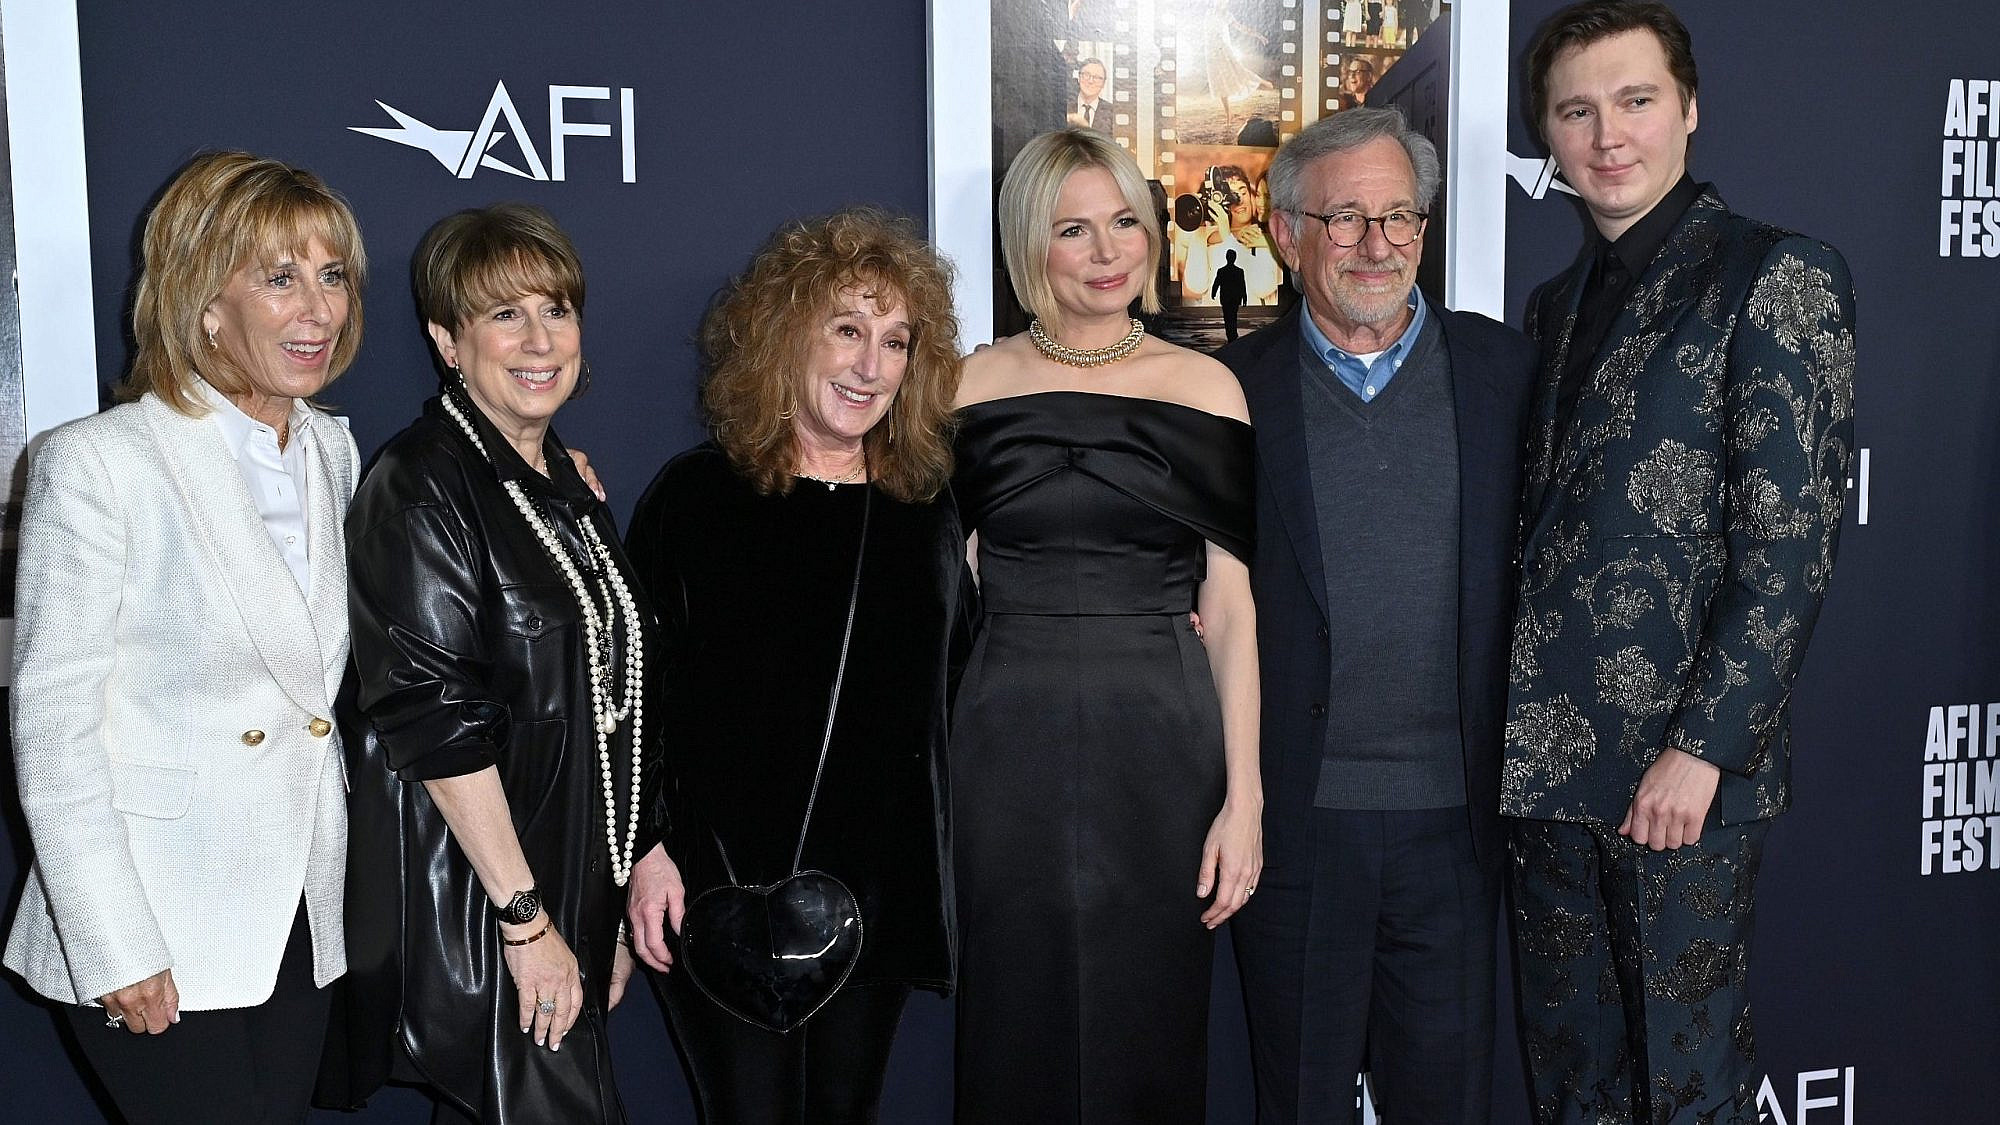 From left: Siblings Anne, Sue, Nancy and Steven Spielberg, and lead actors Michelle Williams and Paul Dano at the premiere for “The Fabelmans,” Nov. 6, 2022. Credit: Featureflash Photo Agency/Shutterstock.